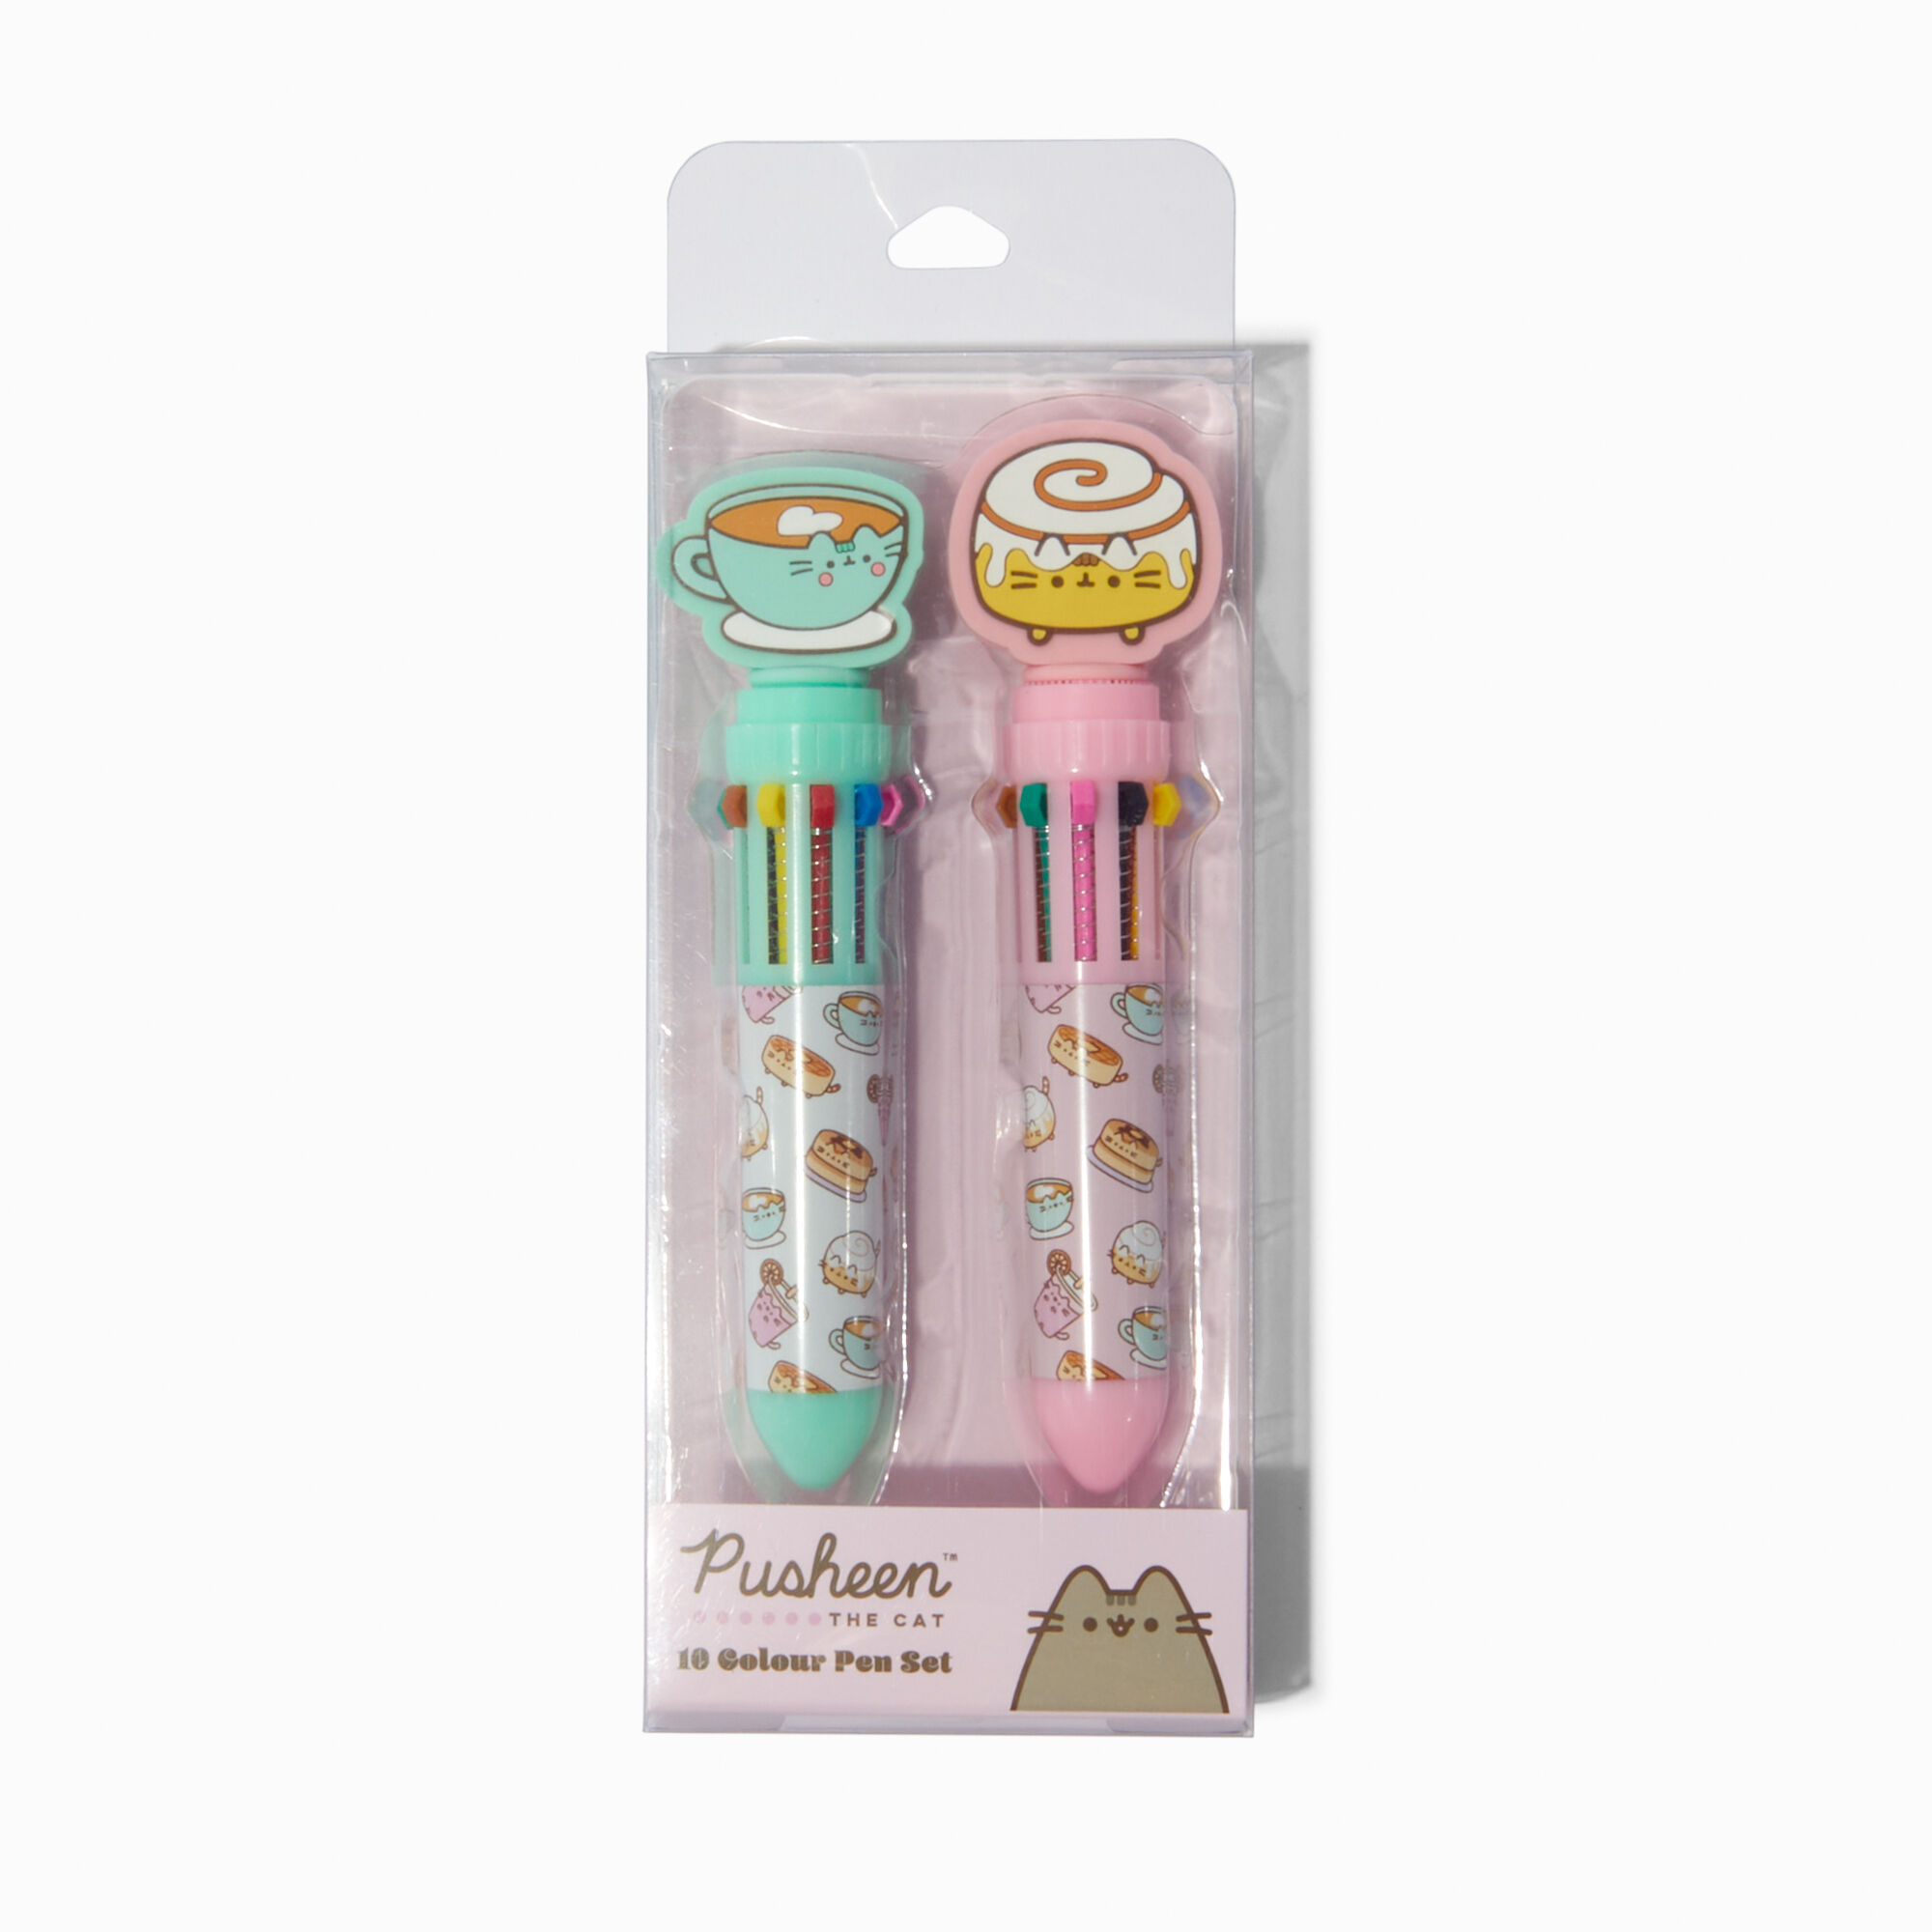 View Claires Pusheen Breakfast Multicolored Pen Set 2 Pack Rainbow information